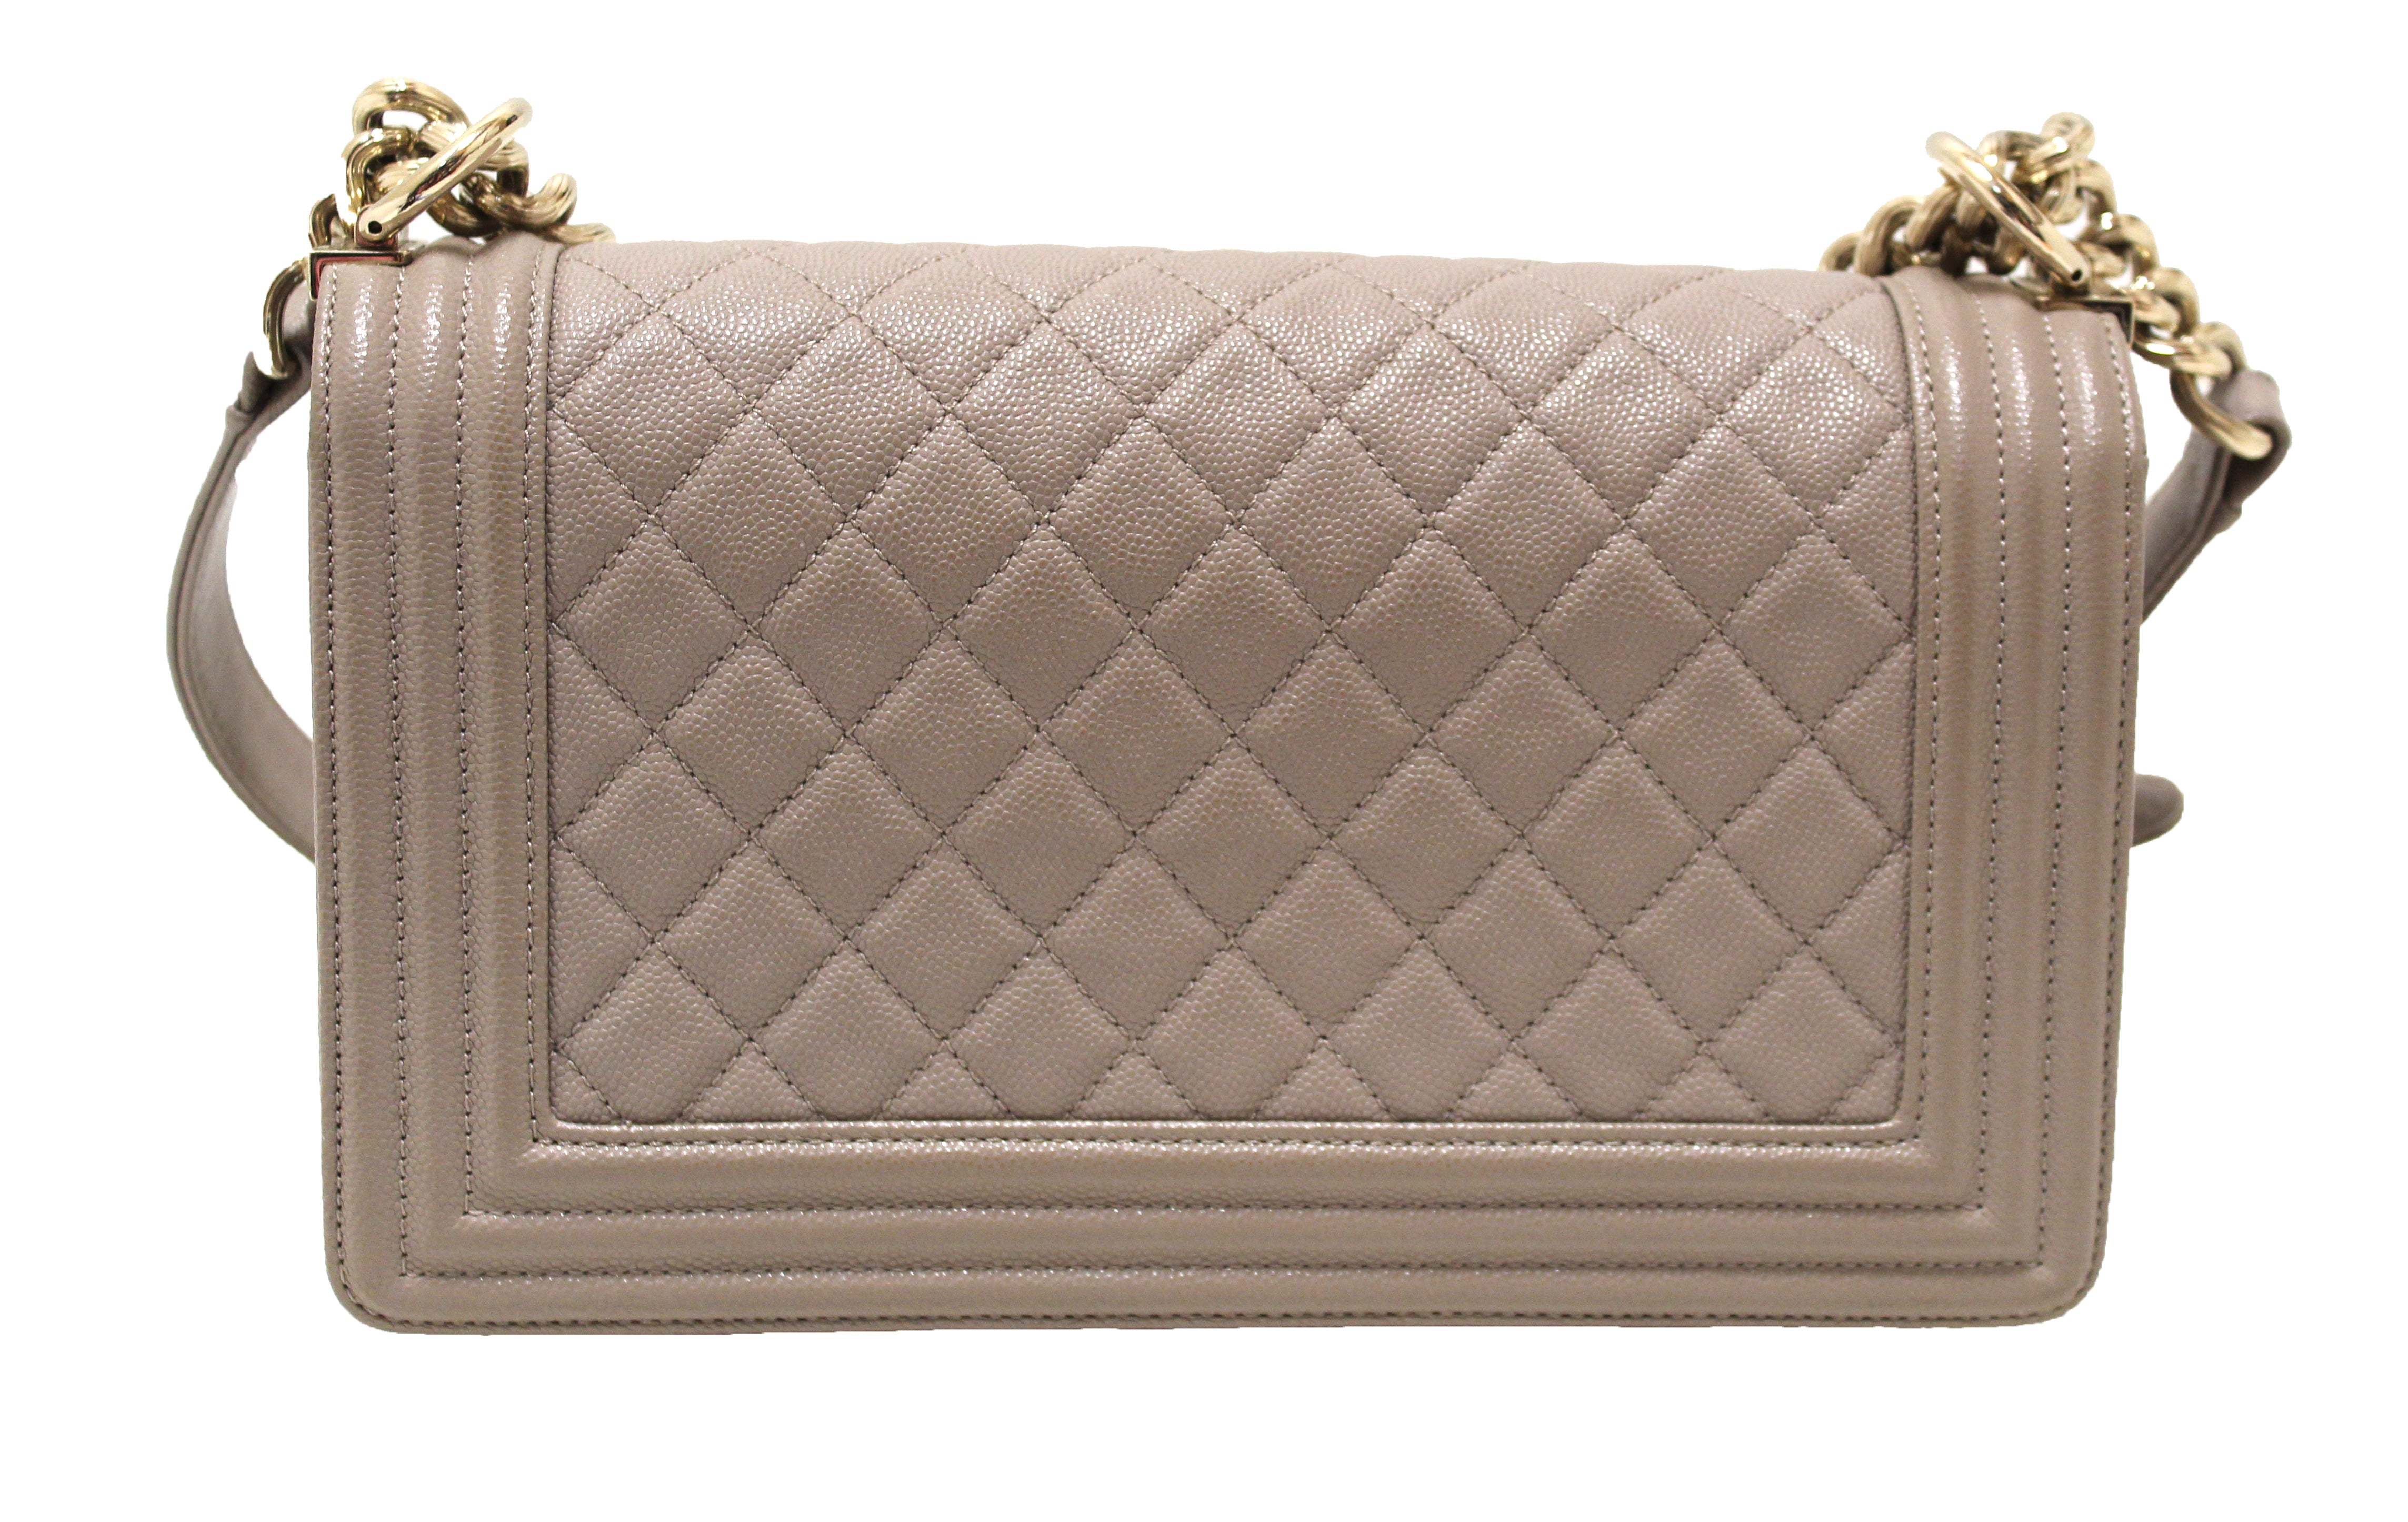 Authentic Chanel Grey Quilted Caviar Old Medium Boy Shoulder Bag